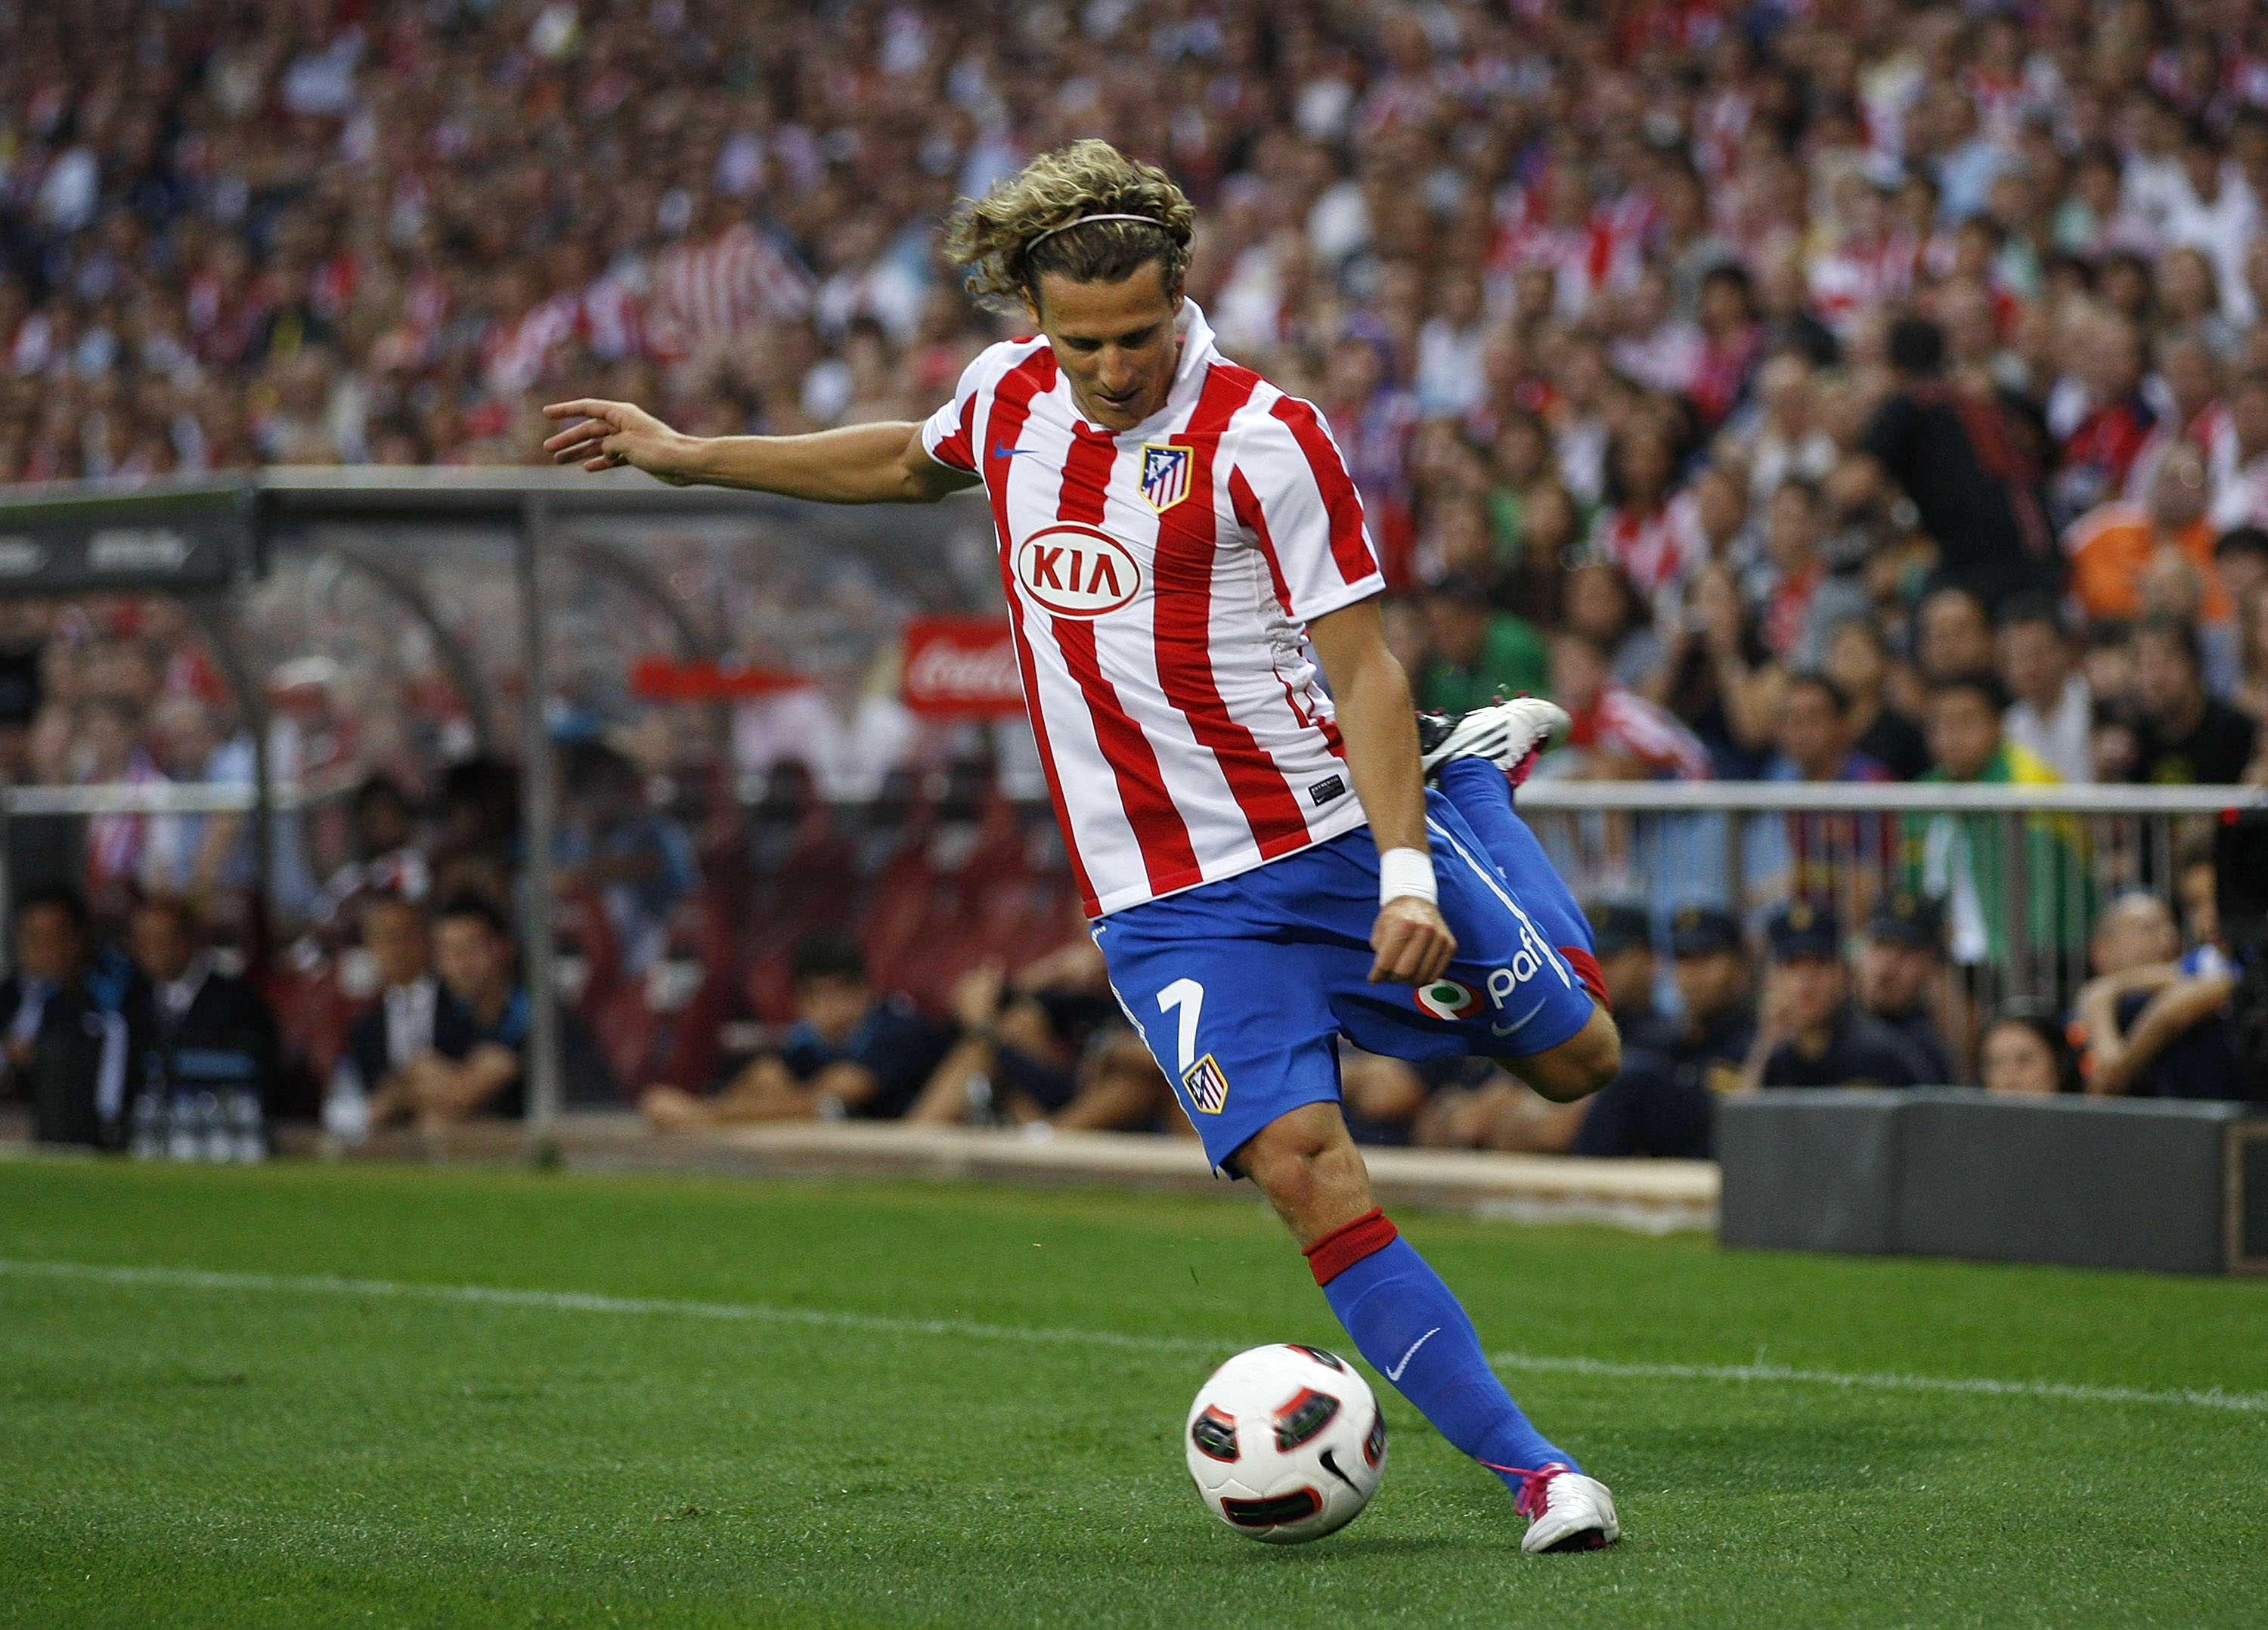 MADRID, SPAIN - SEPTEMBER 19:  Diego Forlan of Atletico Madrid in action during the La Liga match between Atletico Madrid and Barcelona at Vicente Calderon Stadium on September 19, 2010 in Madrid, Spain.  (Photo by Angel Martinez/Getty Images)